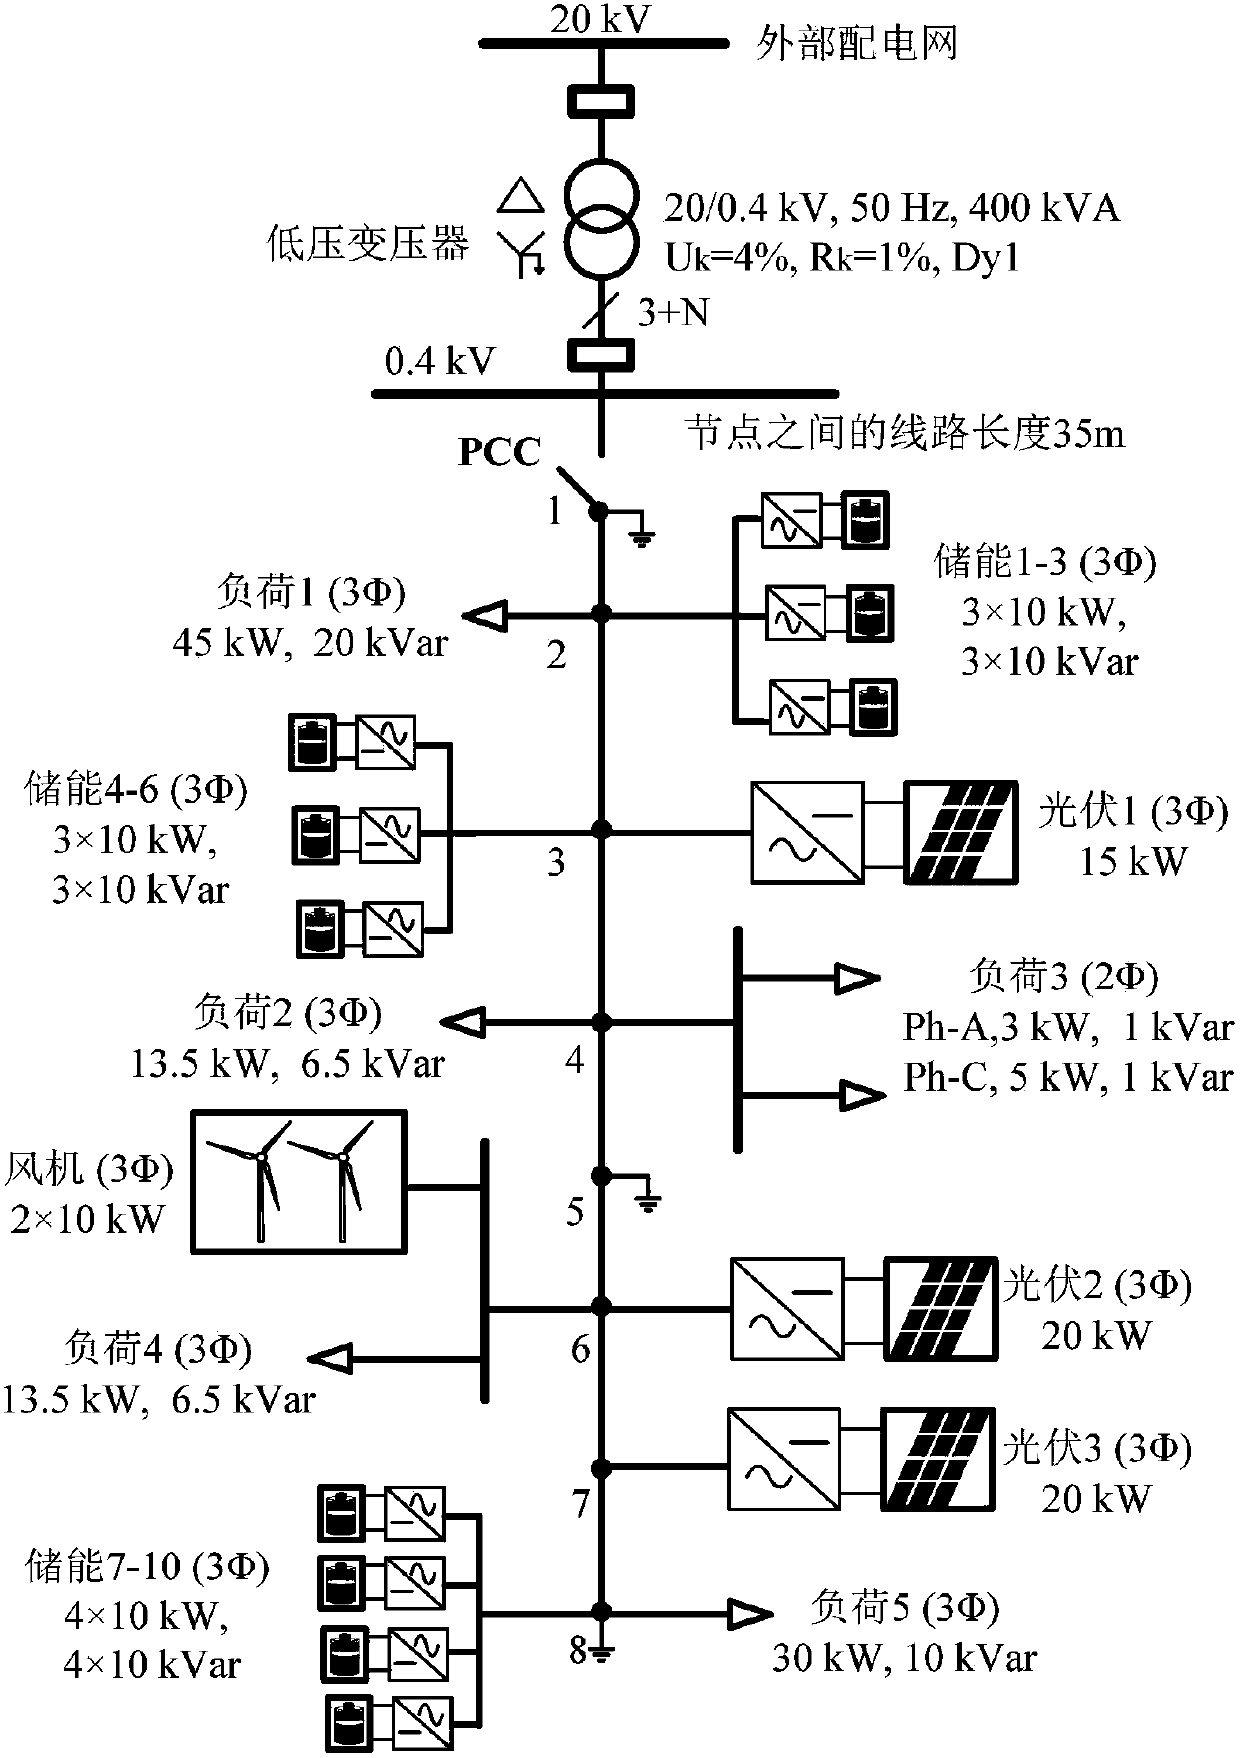 Distributed coordination control method of multiple energy storage units in grid-connected microgrid